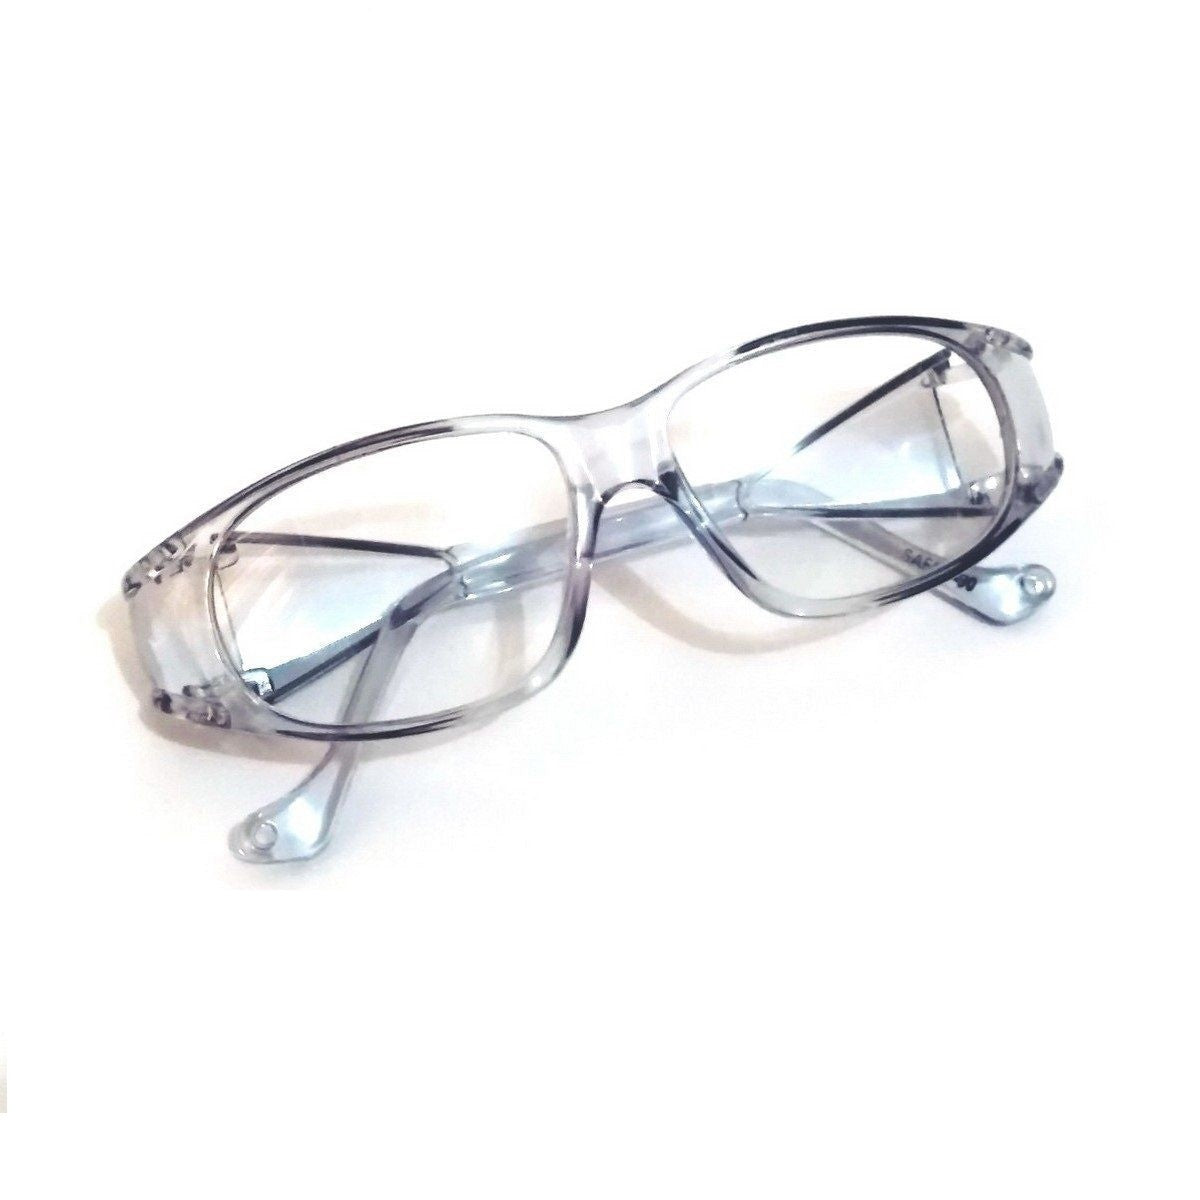 EYESafety Grey Clear Frame Prescription Safety Glasses with Side Covered